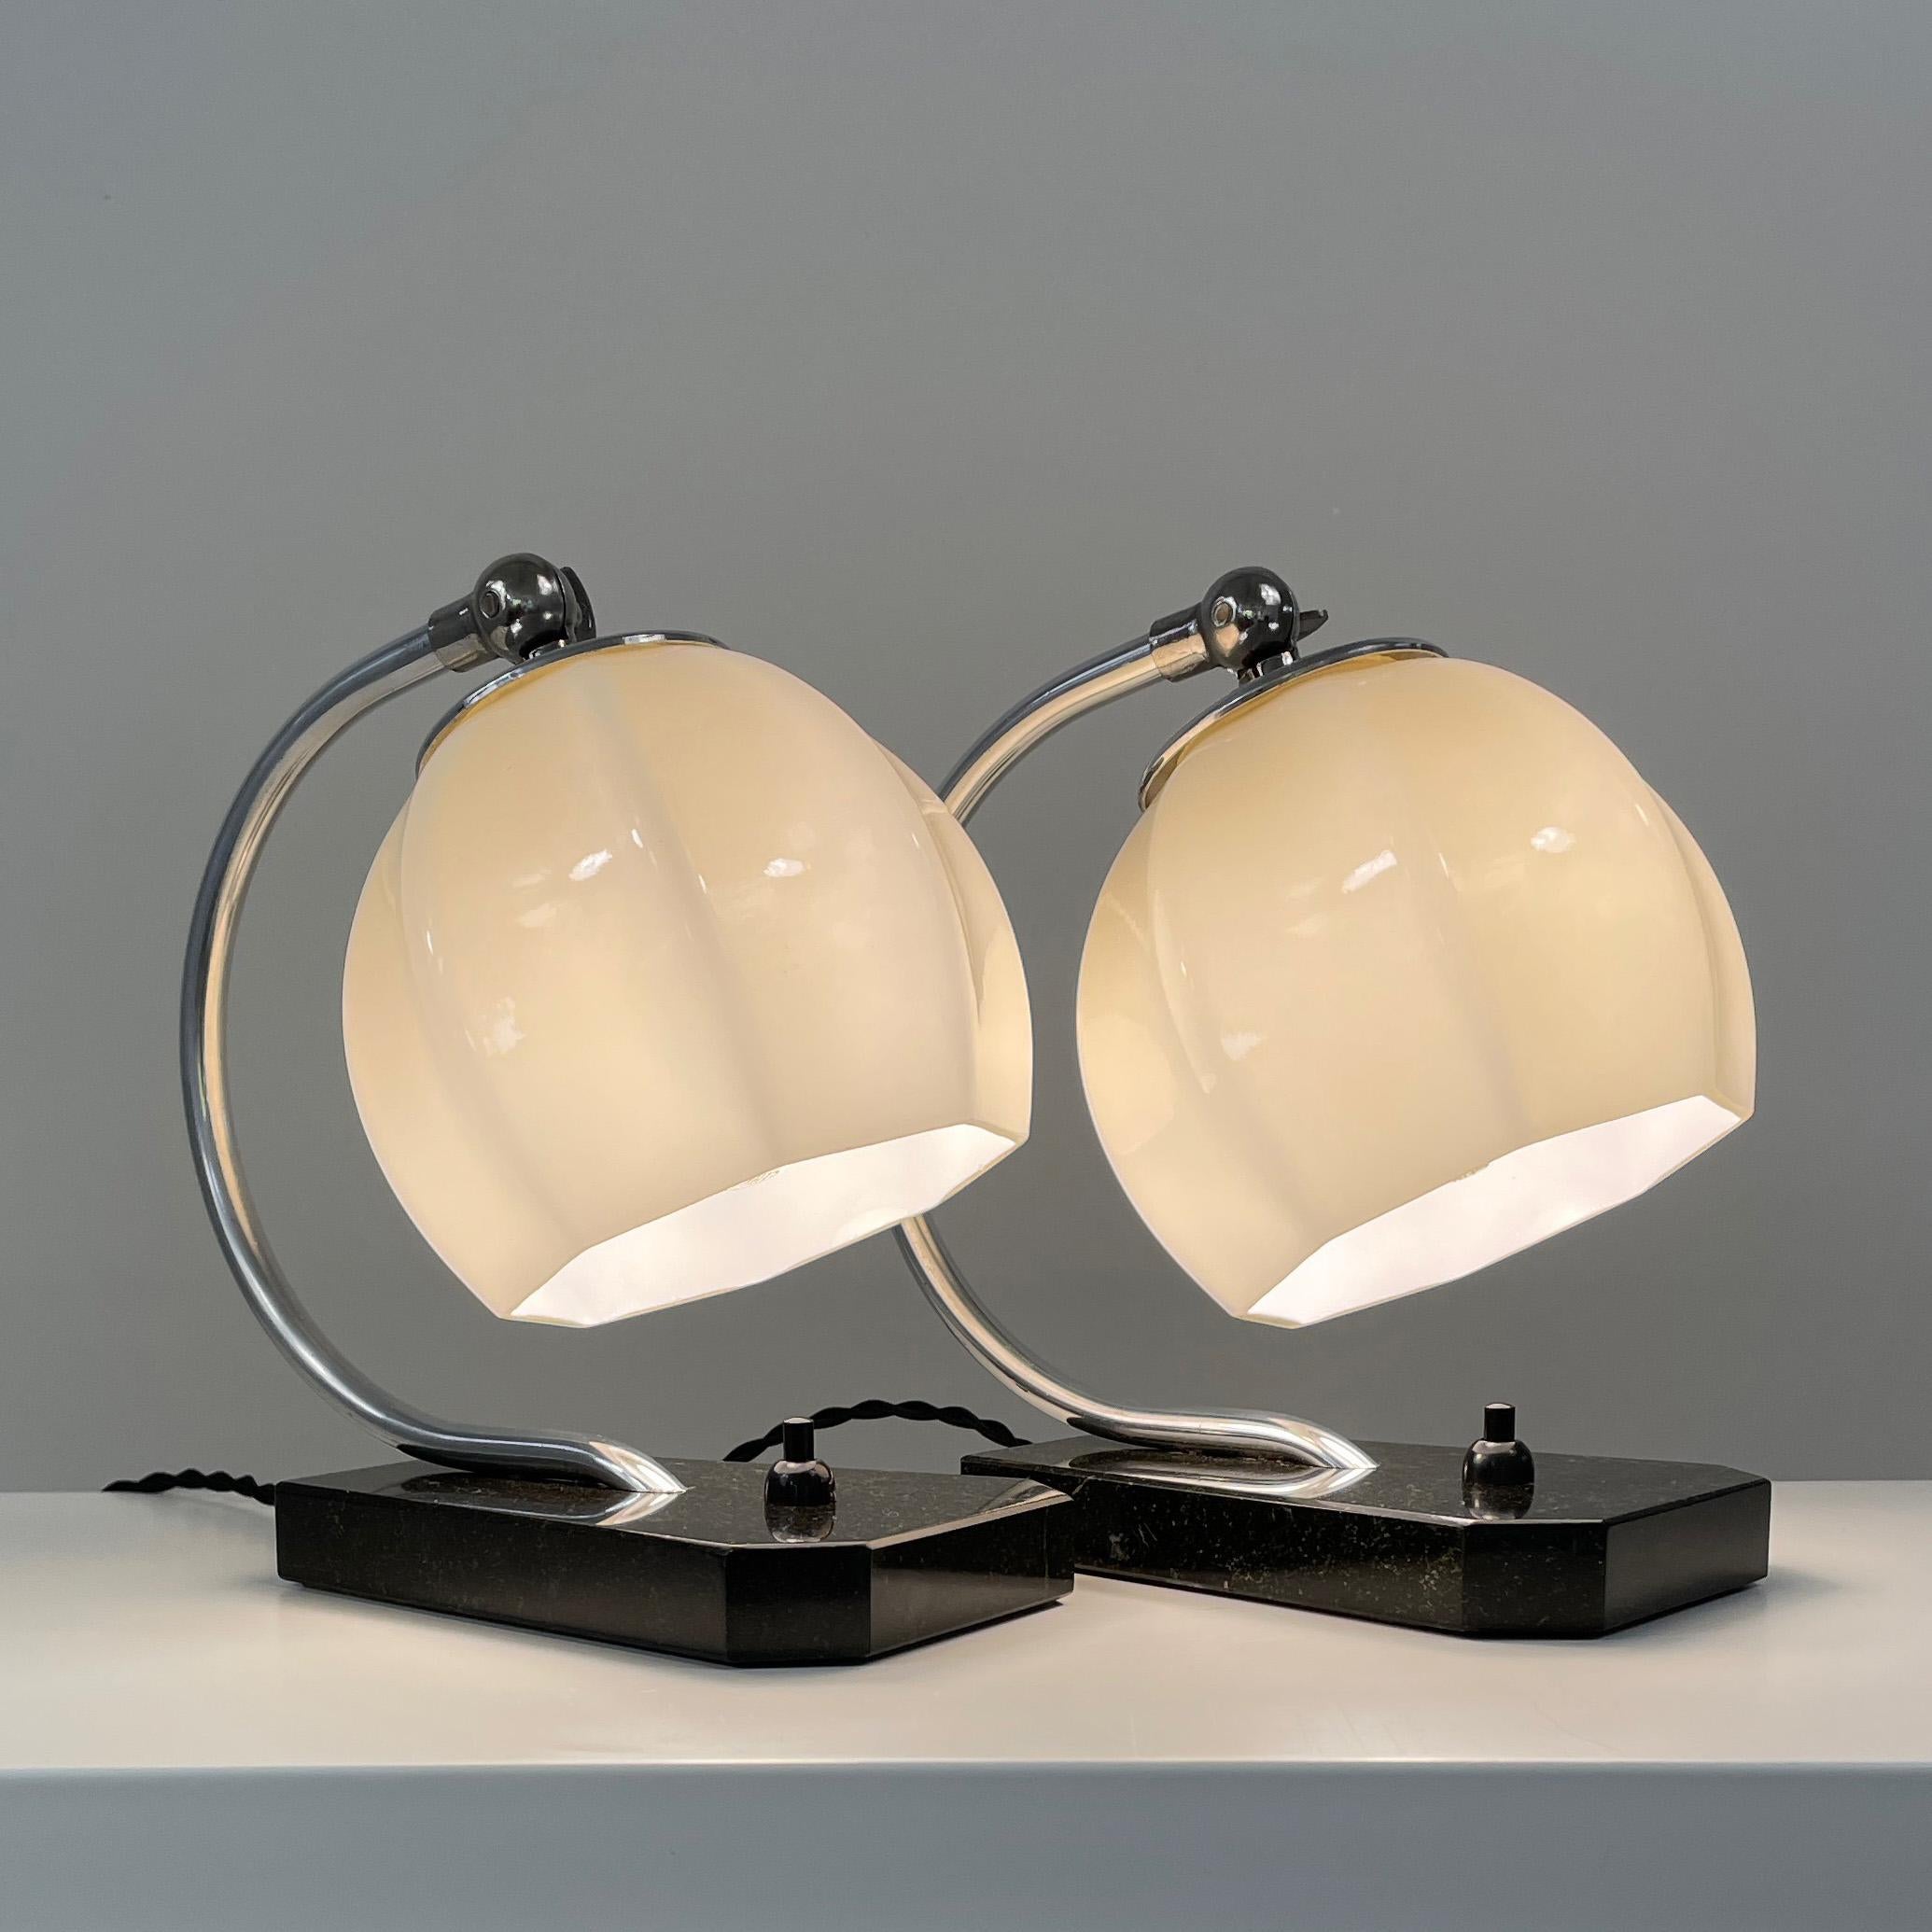 German Art Deco Opaline Glass, Marble and Aluminum Table Lamps, 1930s For Sale 1